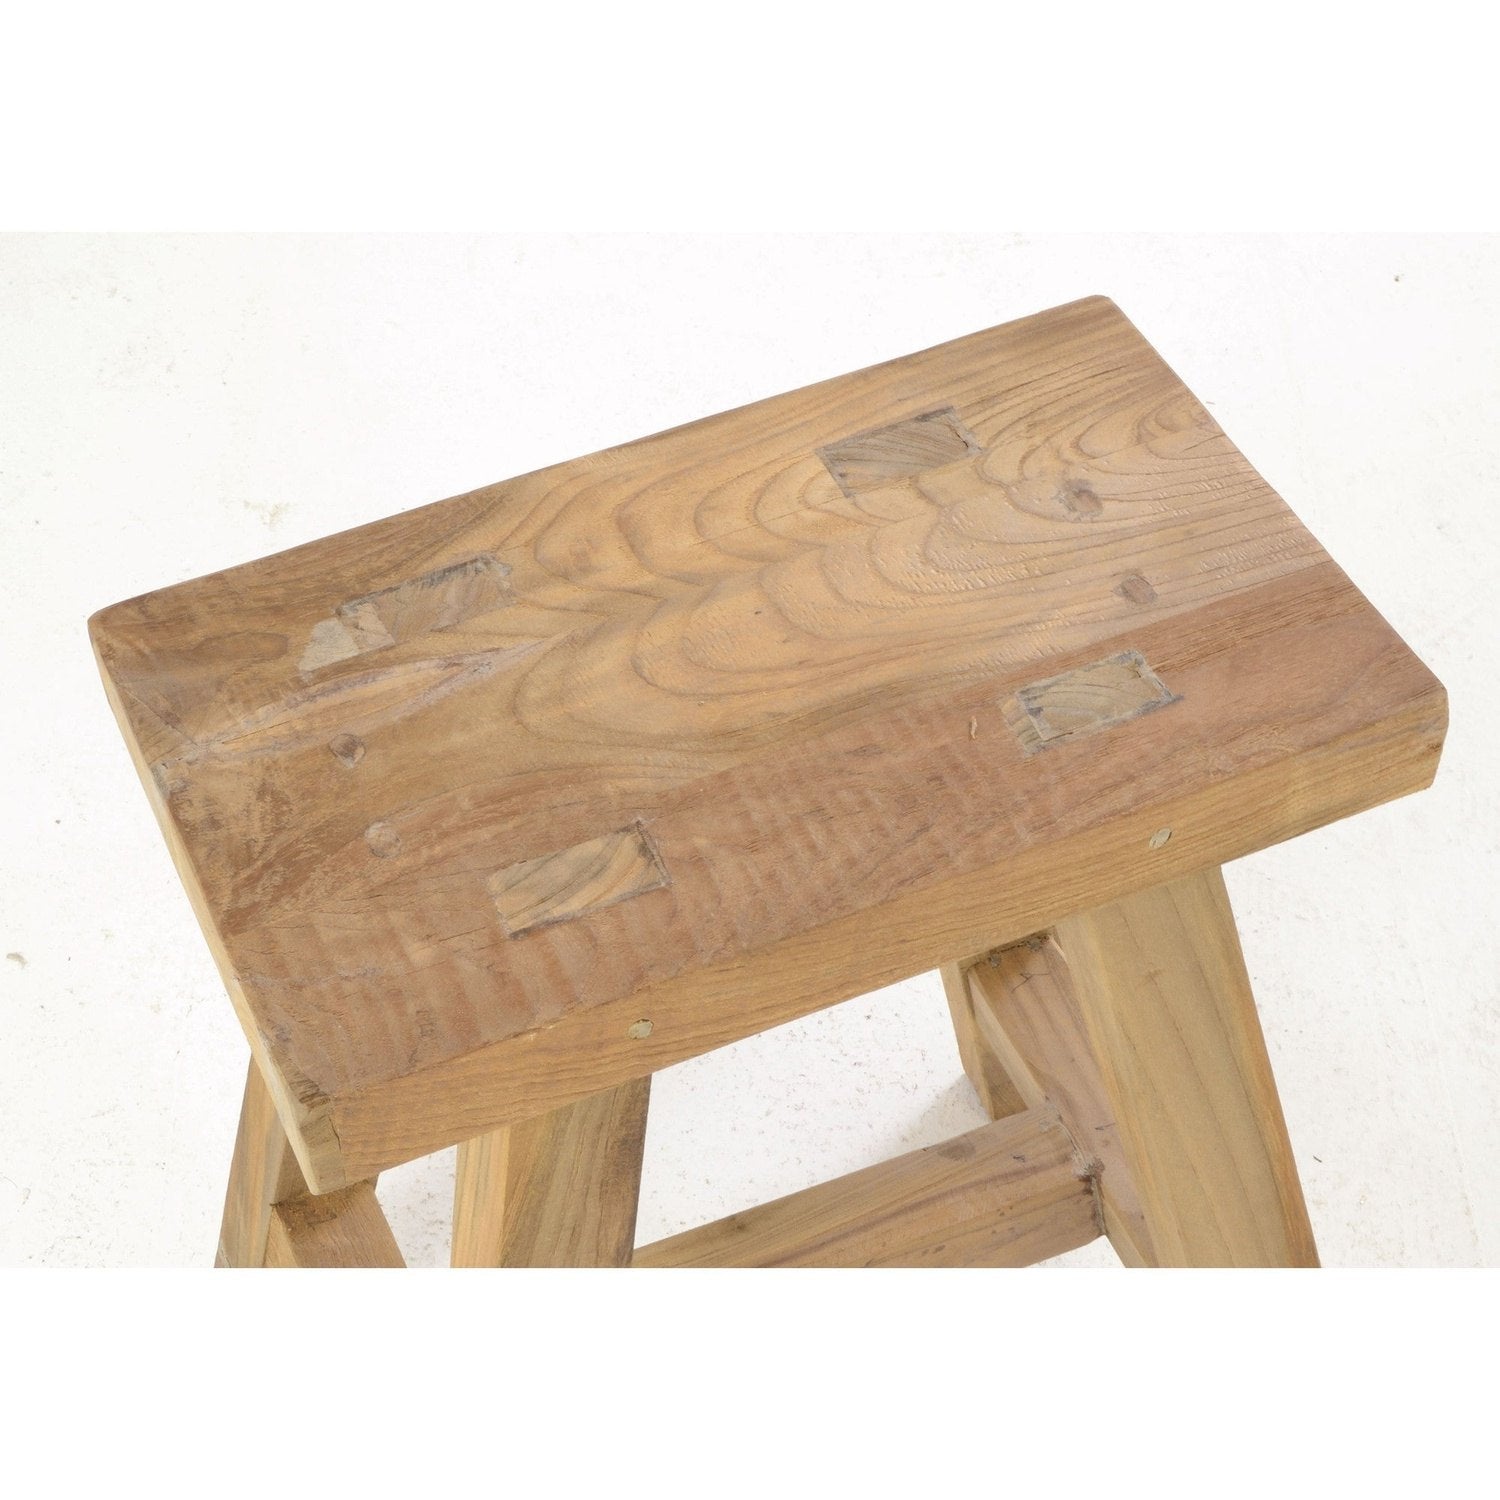 Rustic Country Stool